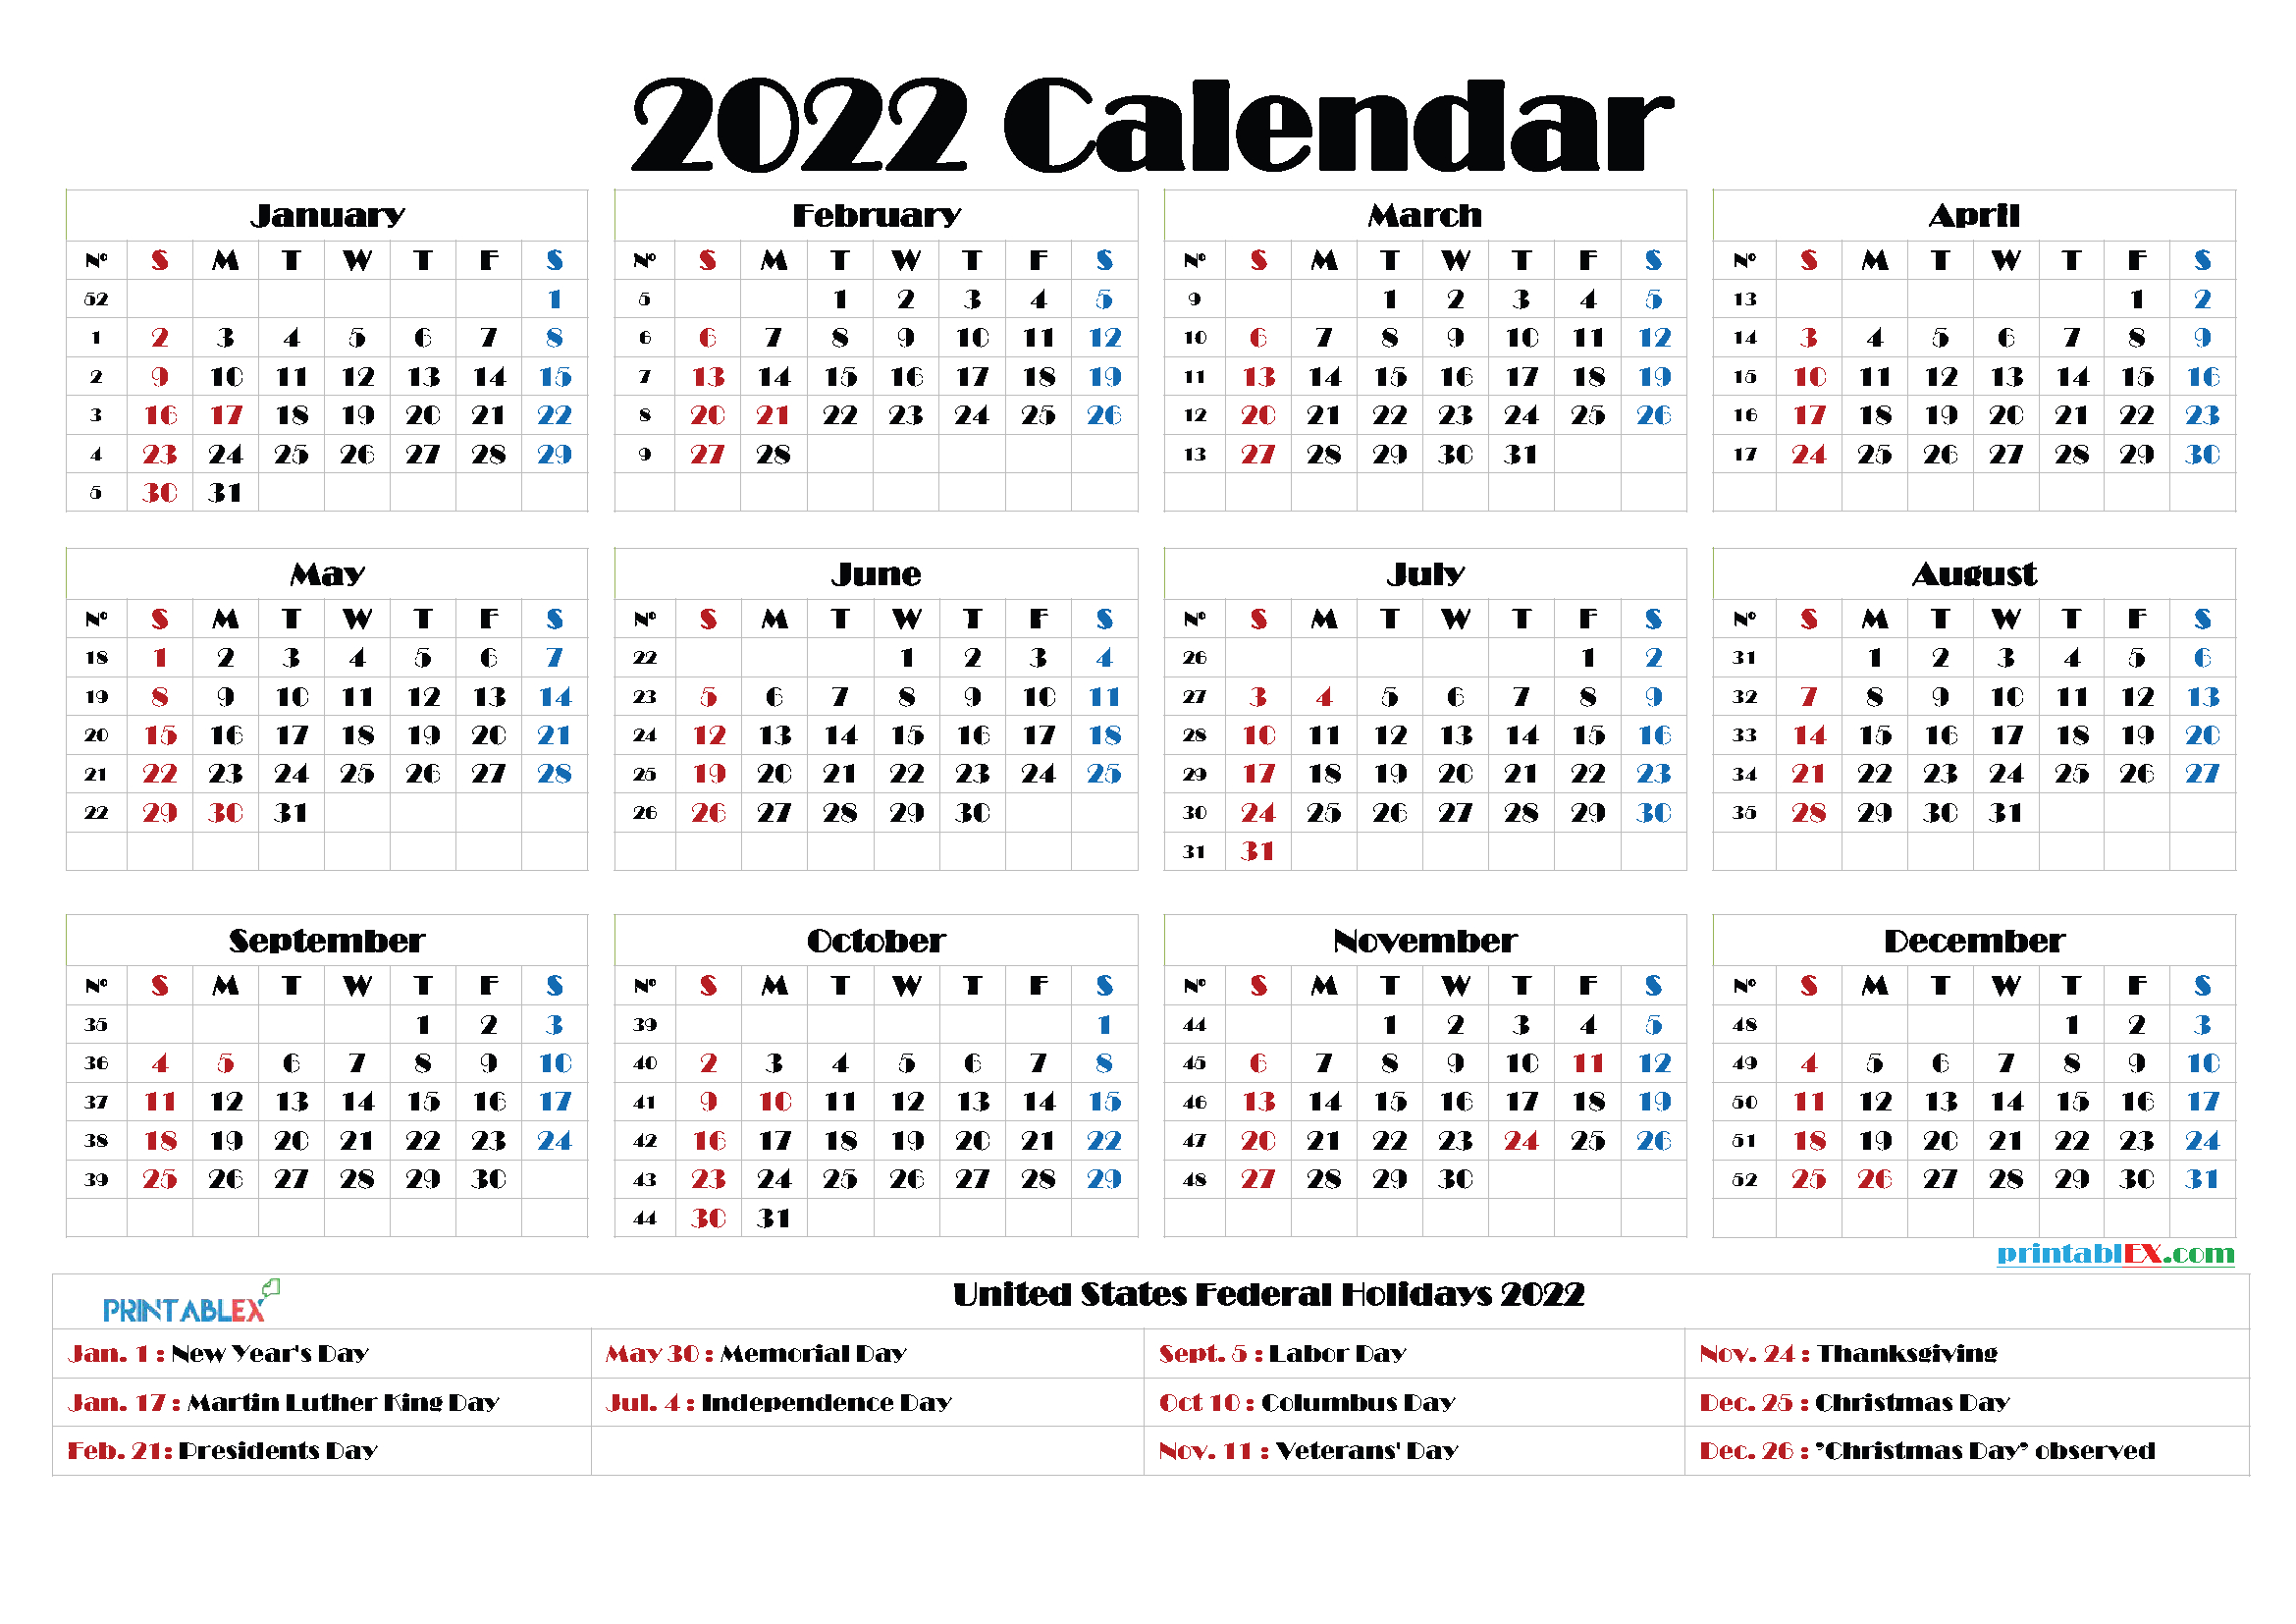 Federal Holidays For 2022 / 2022 Calendar With Us Holidays